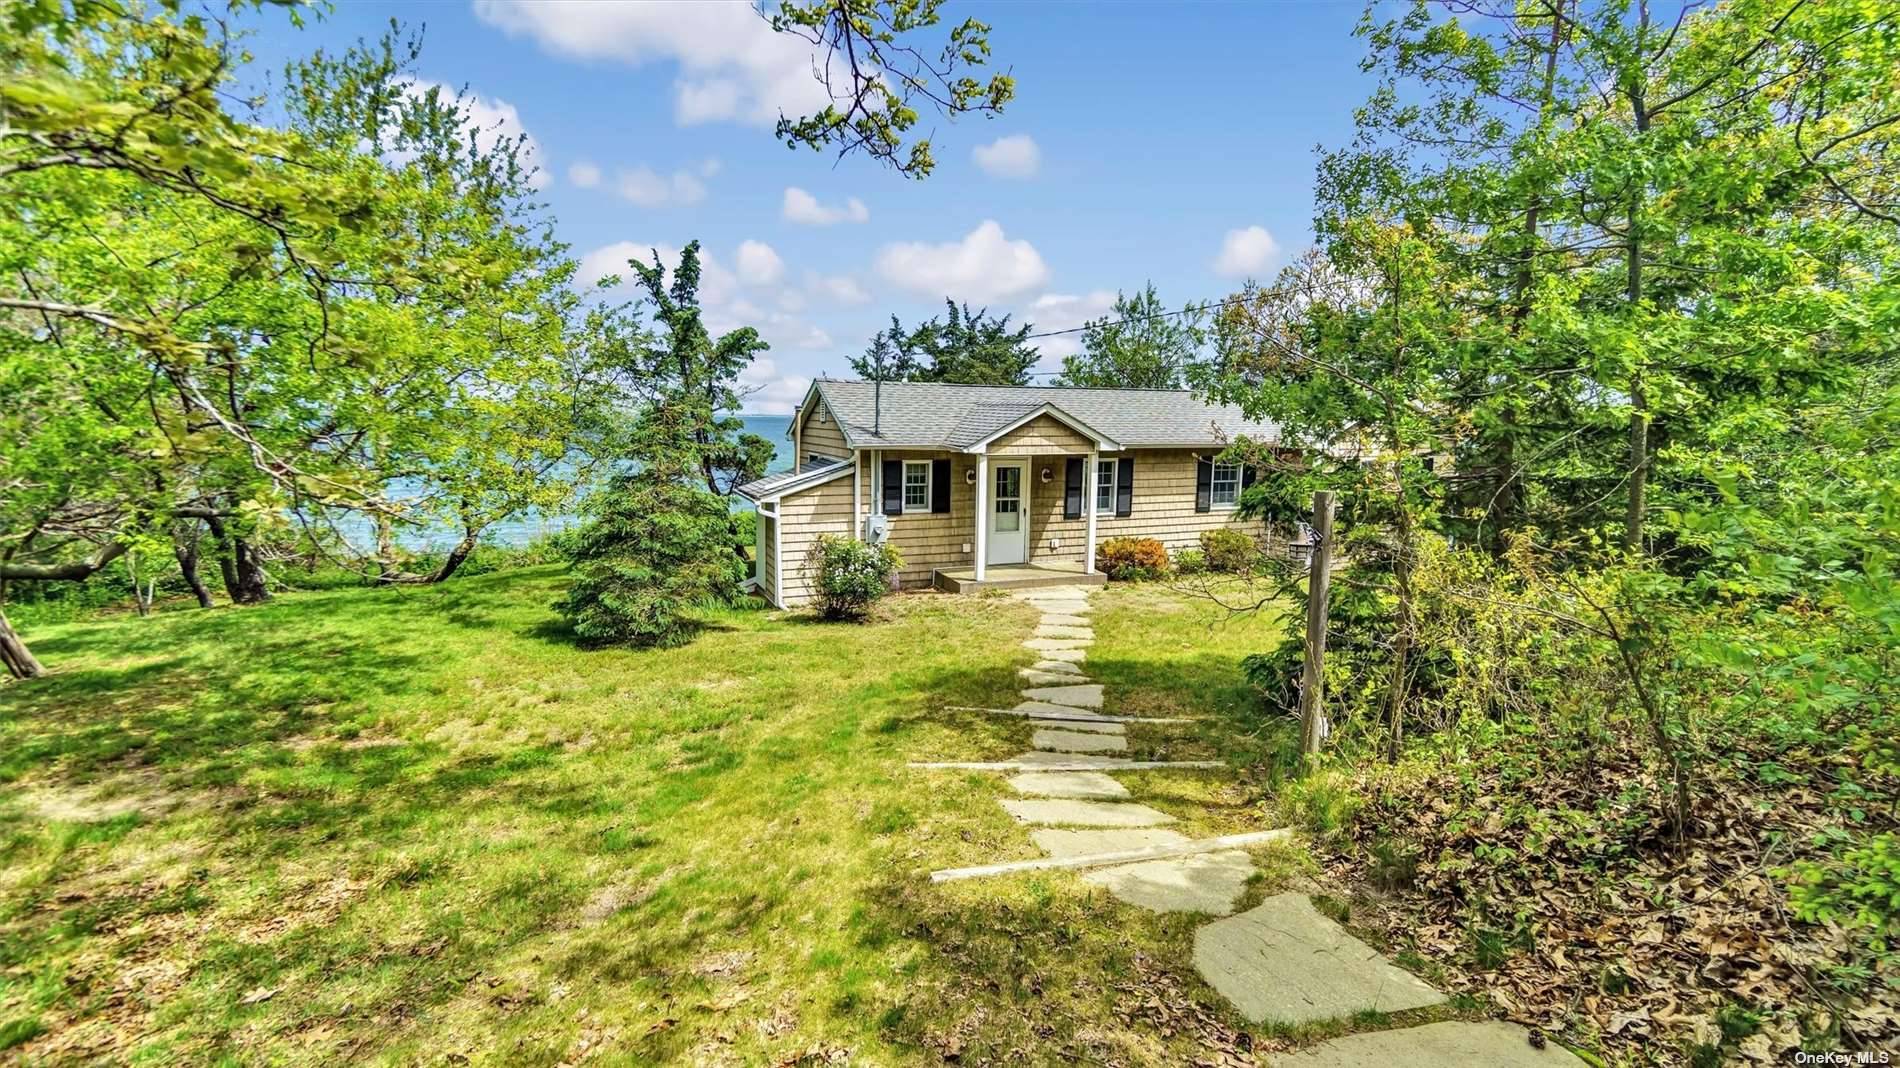 What a Spot !. 8 of an Acre On the Bluff Overlooking the Peconic.